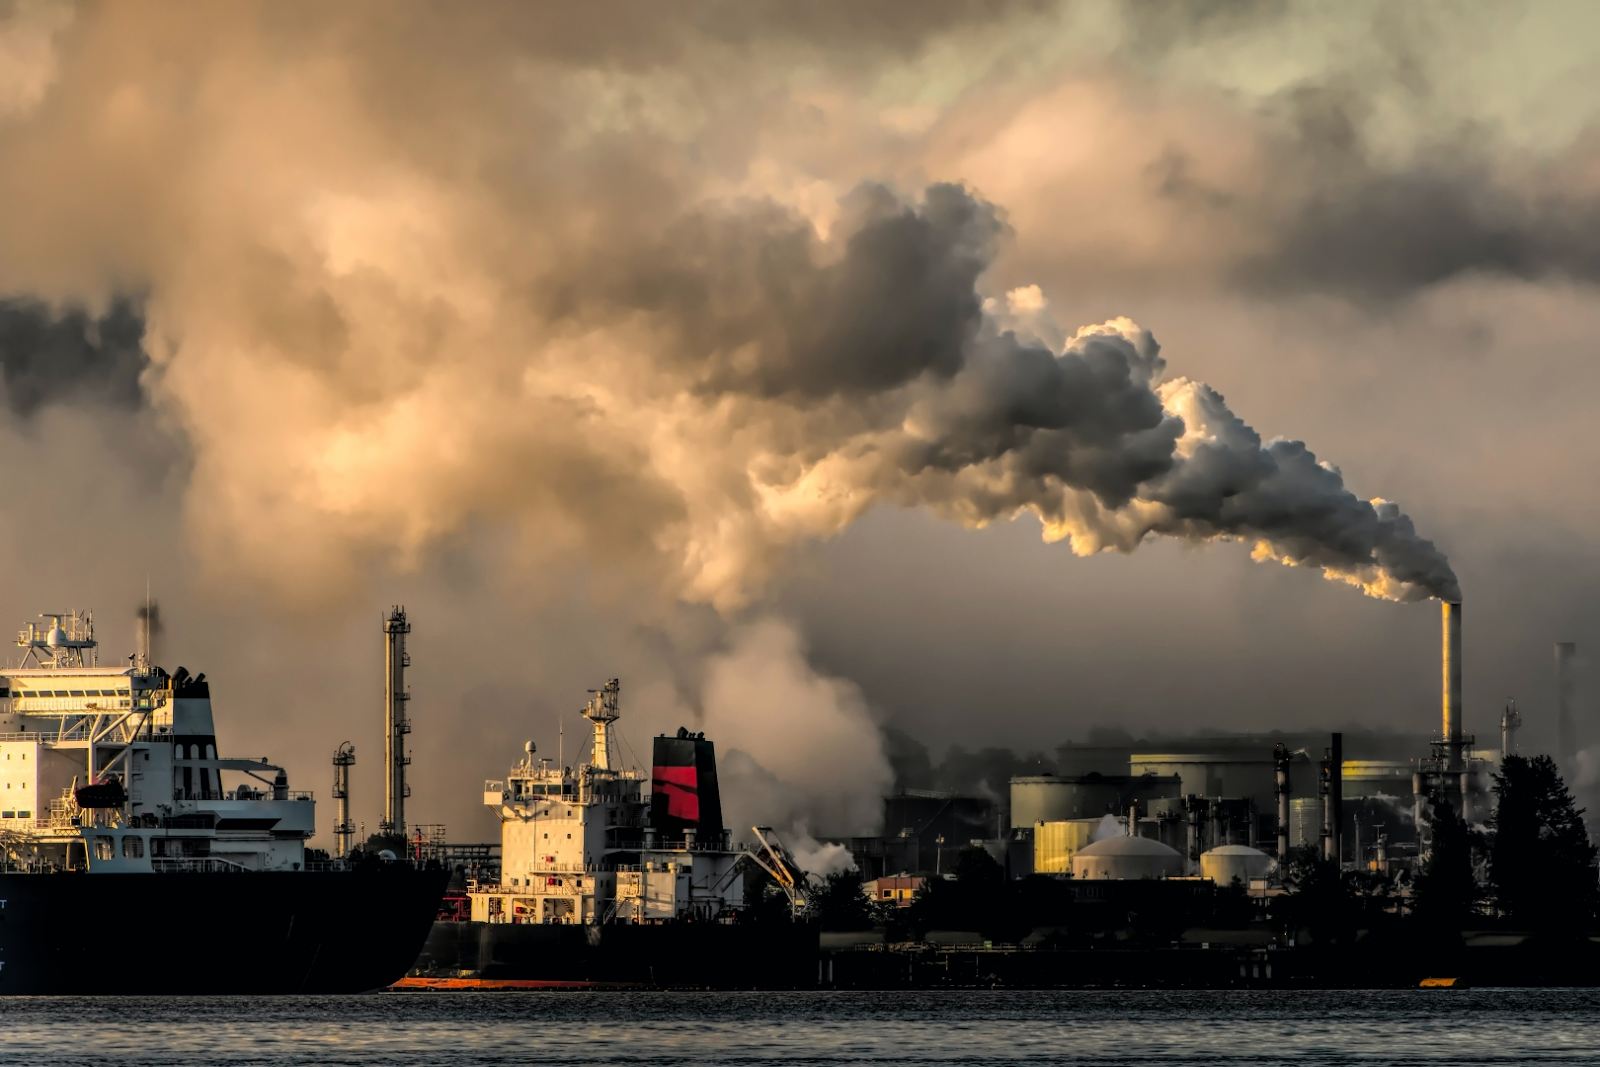 Image of pollution stemming from urbanization which can impact global climate change